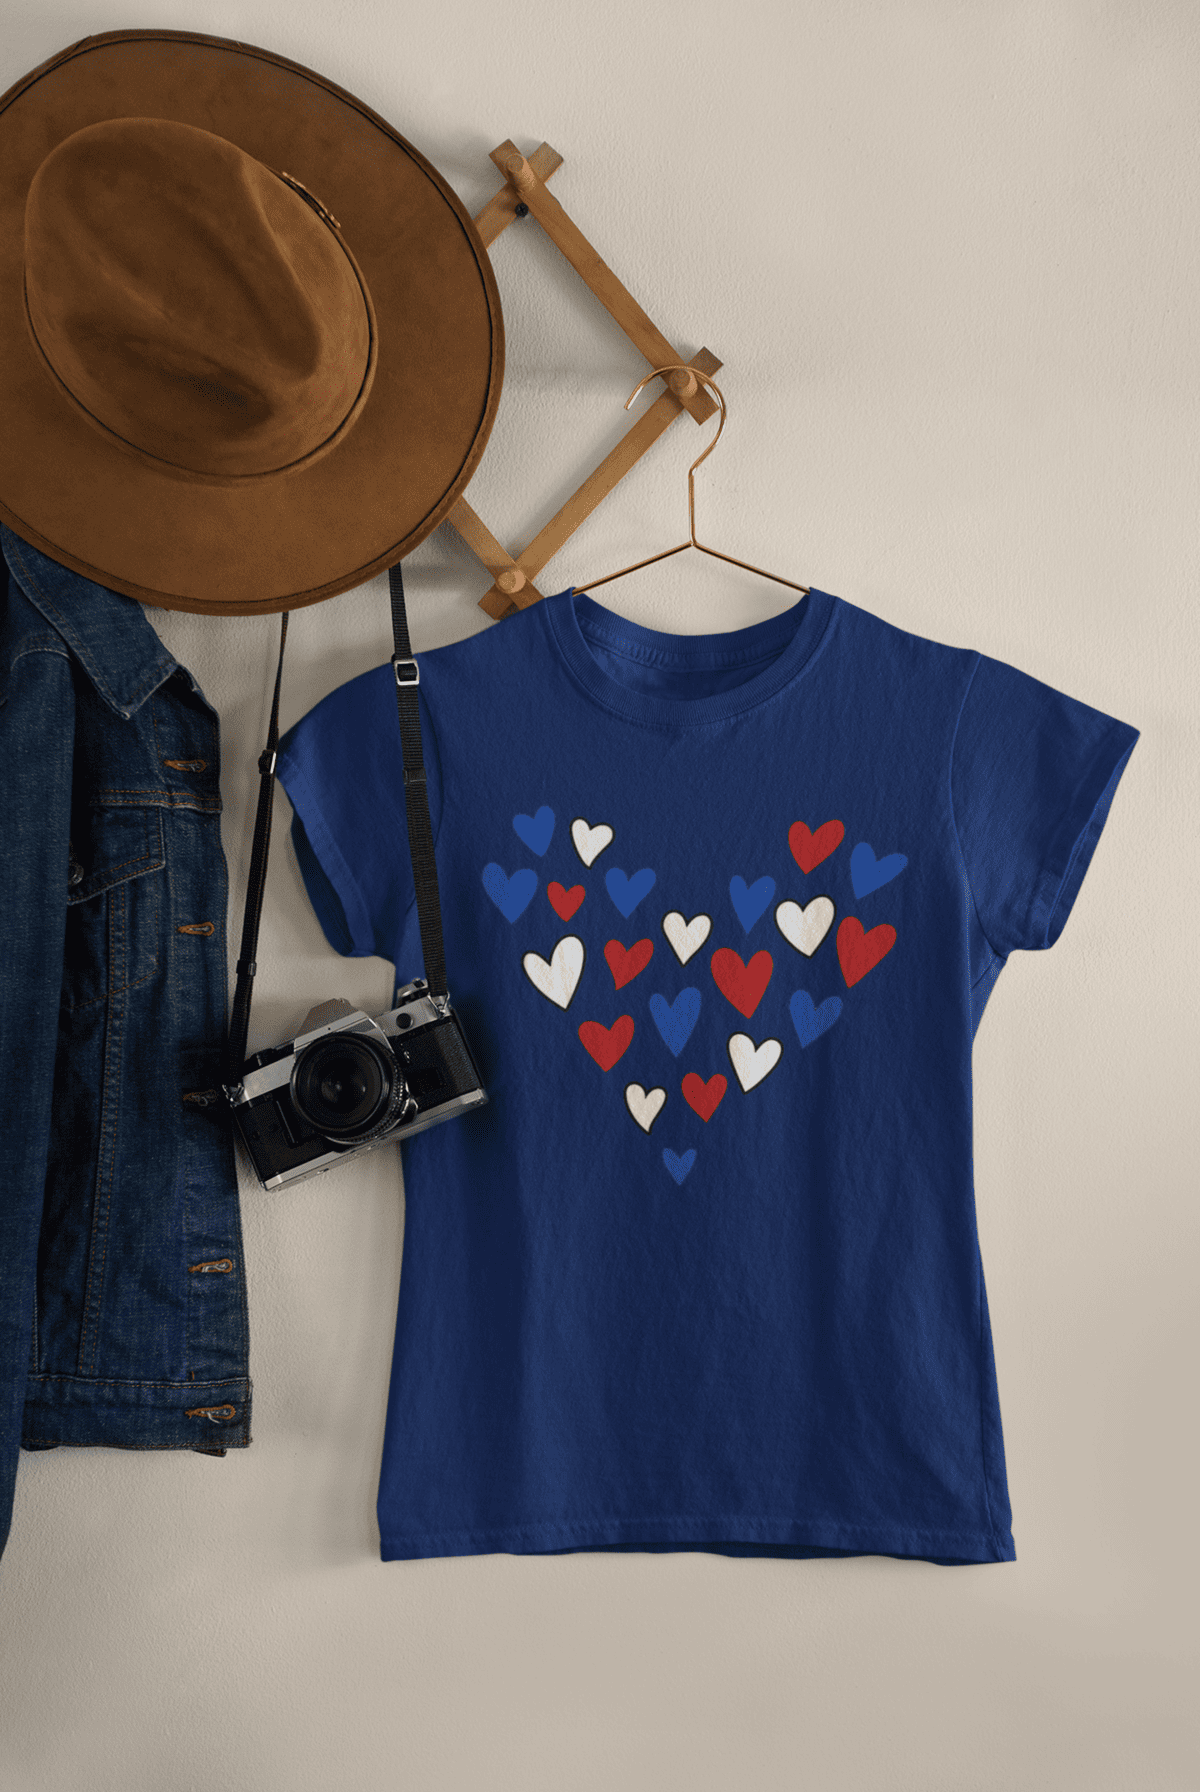 Red, White and Blue hearts - Cricut t-shirt project